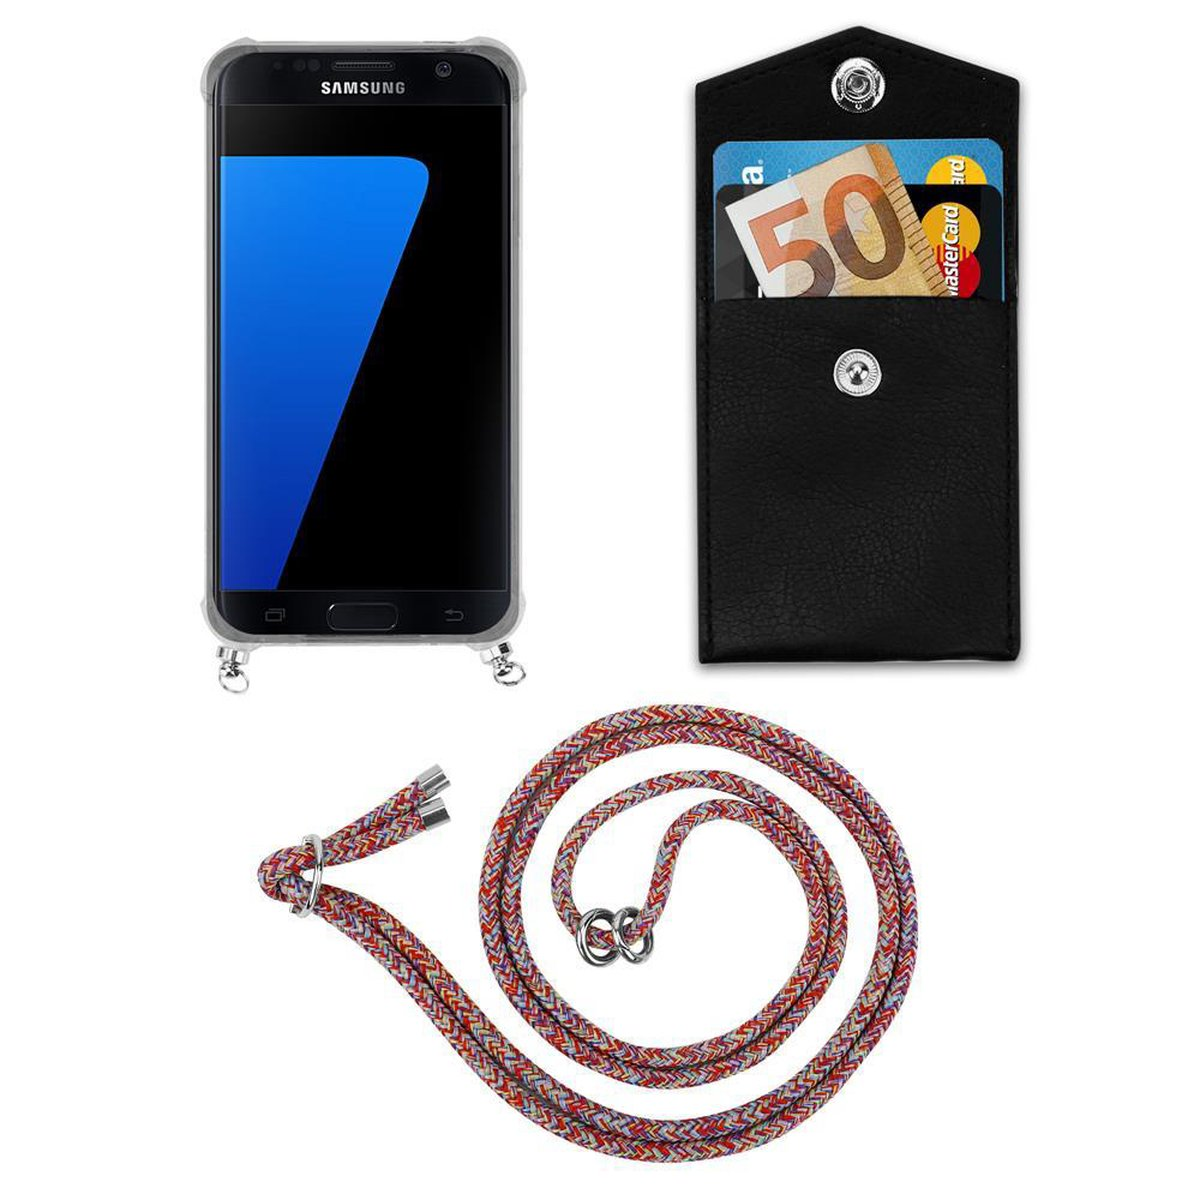 Samsung, Kordel COLORFUL Ringen, Hülle, Kette Handy Galaxy Silber und abnehmbarer mit Band CADORABO PARROT Backcover, S7,